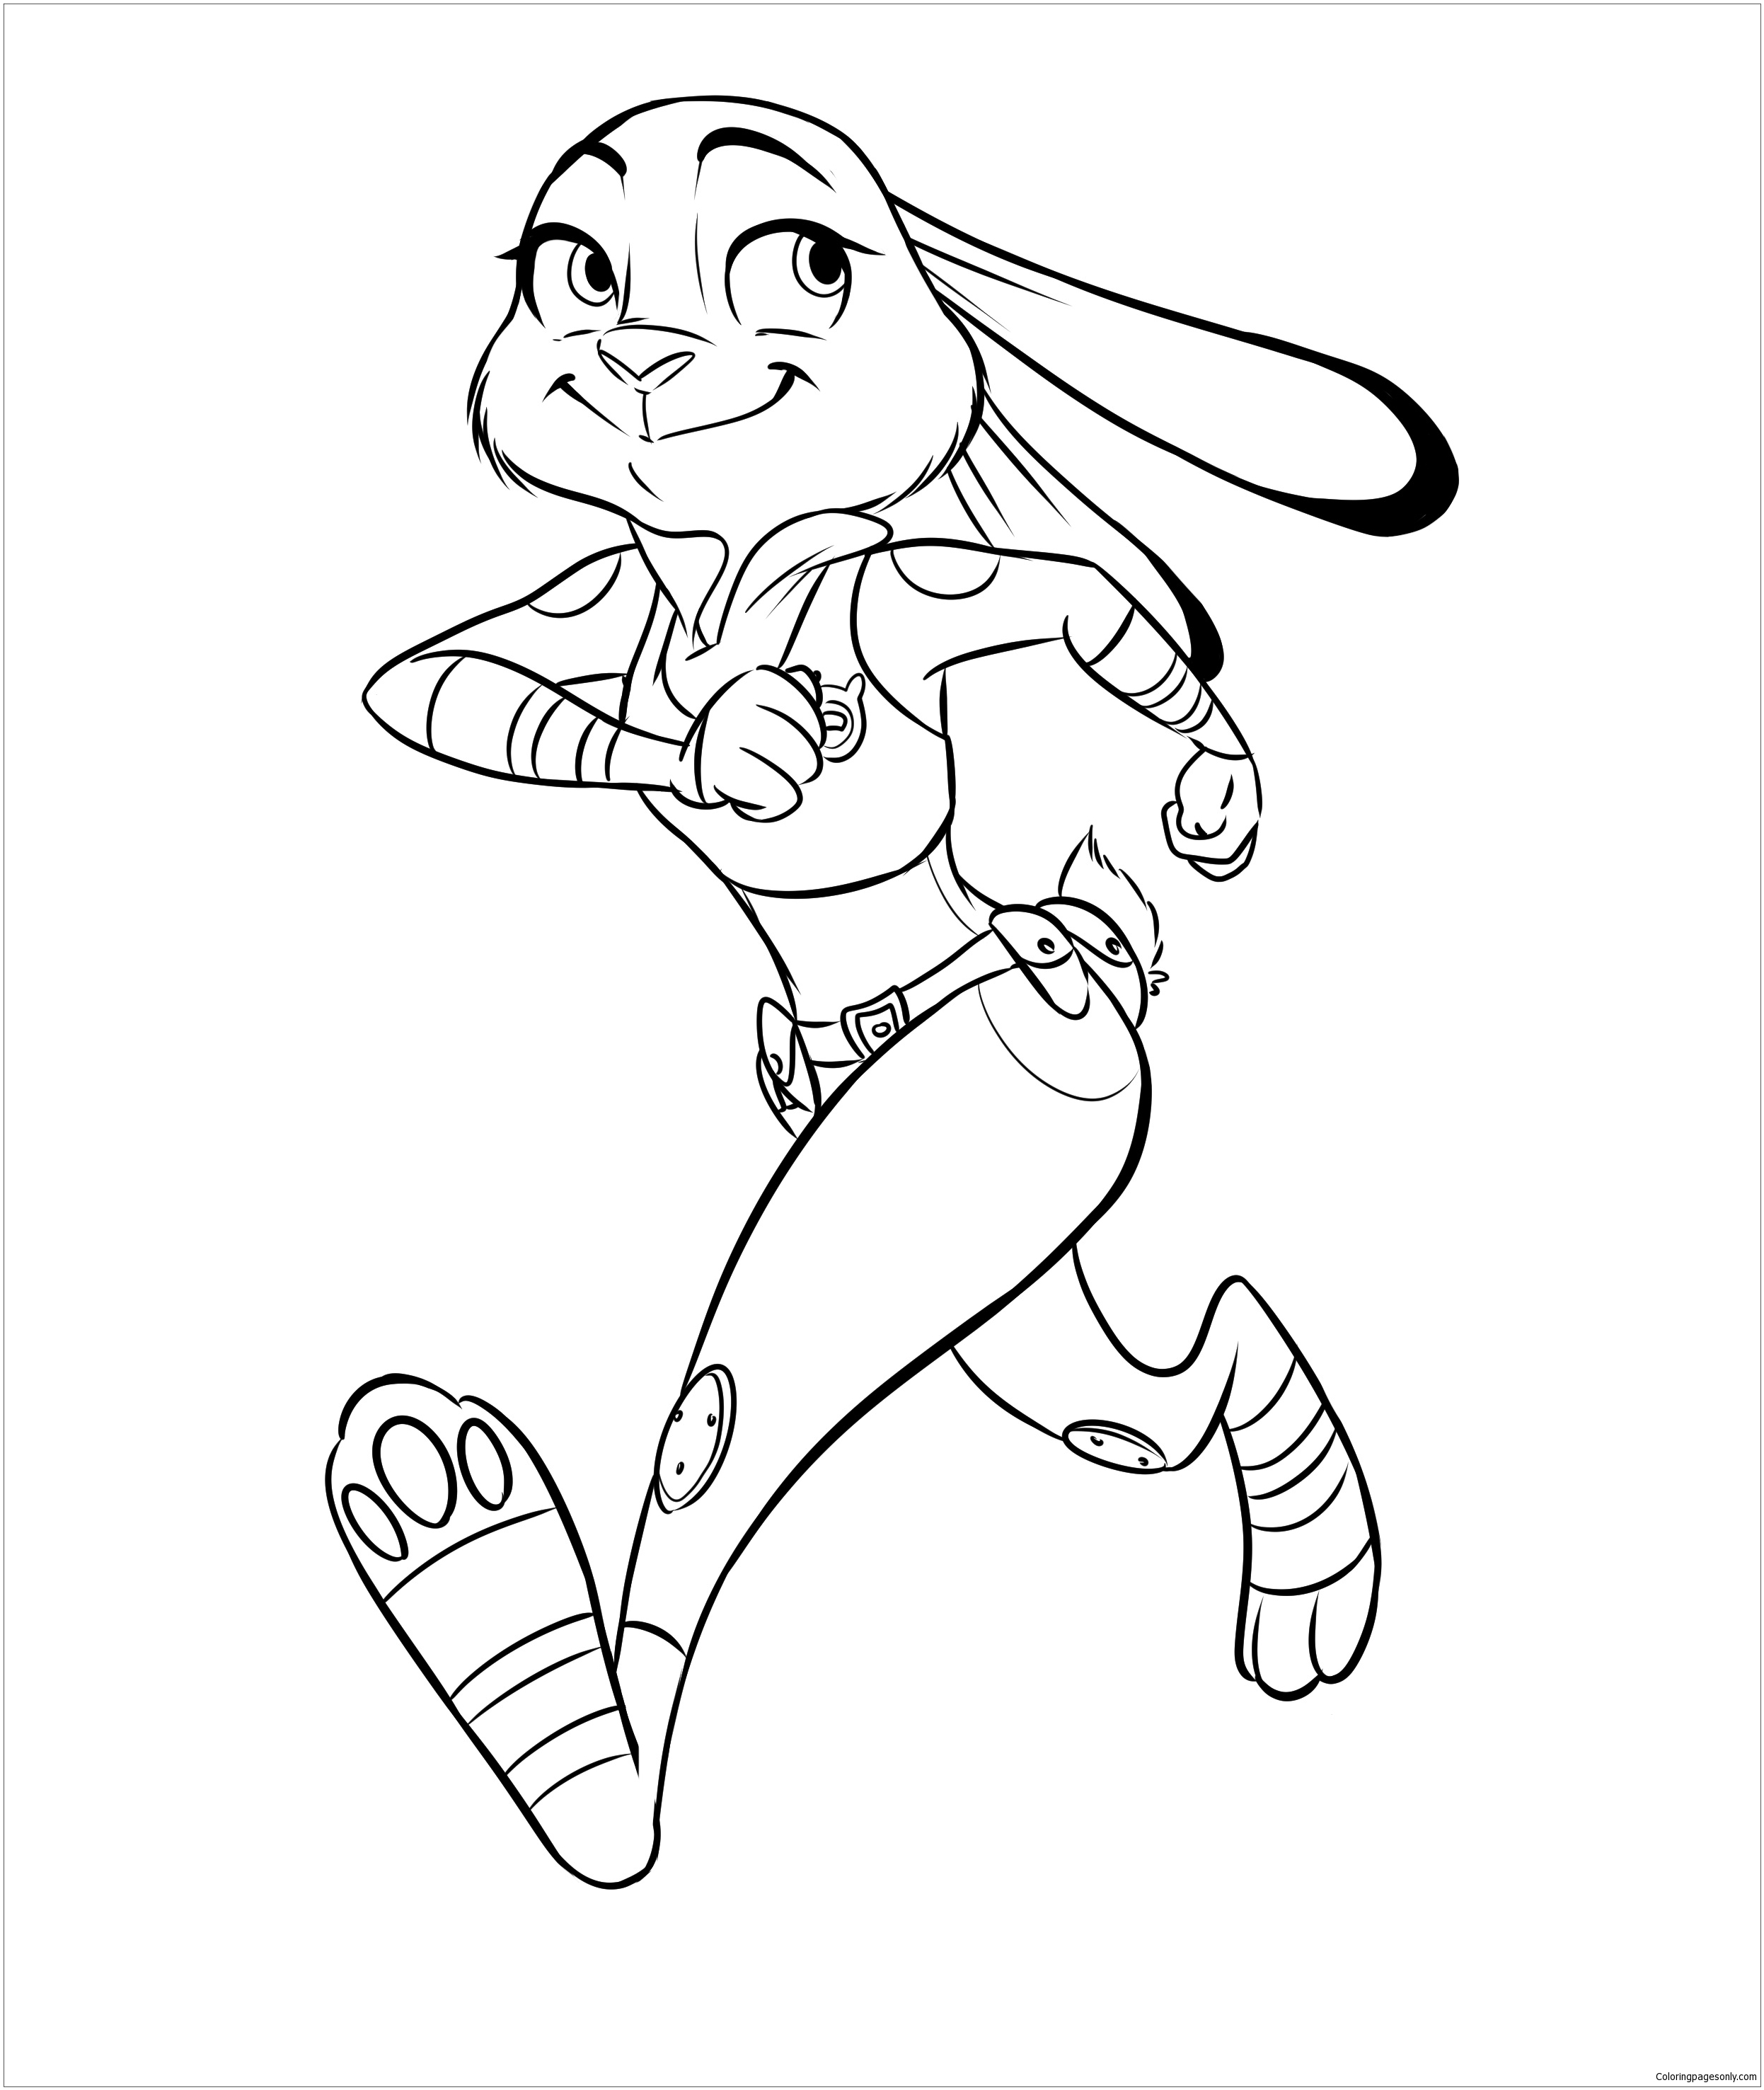 Download Judy Hopps from Zootopia 1 Coloring Page - Free Coloring Pages Online